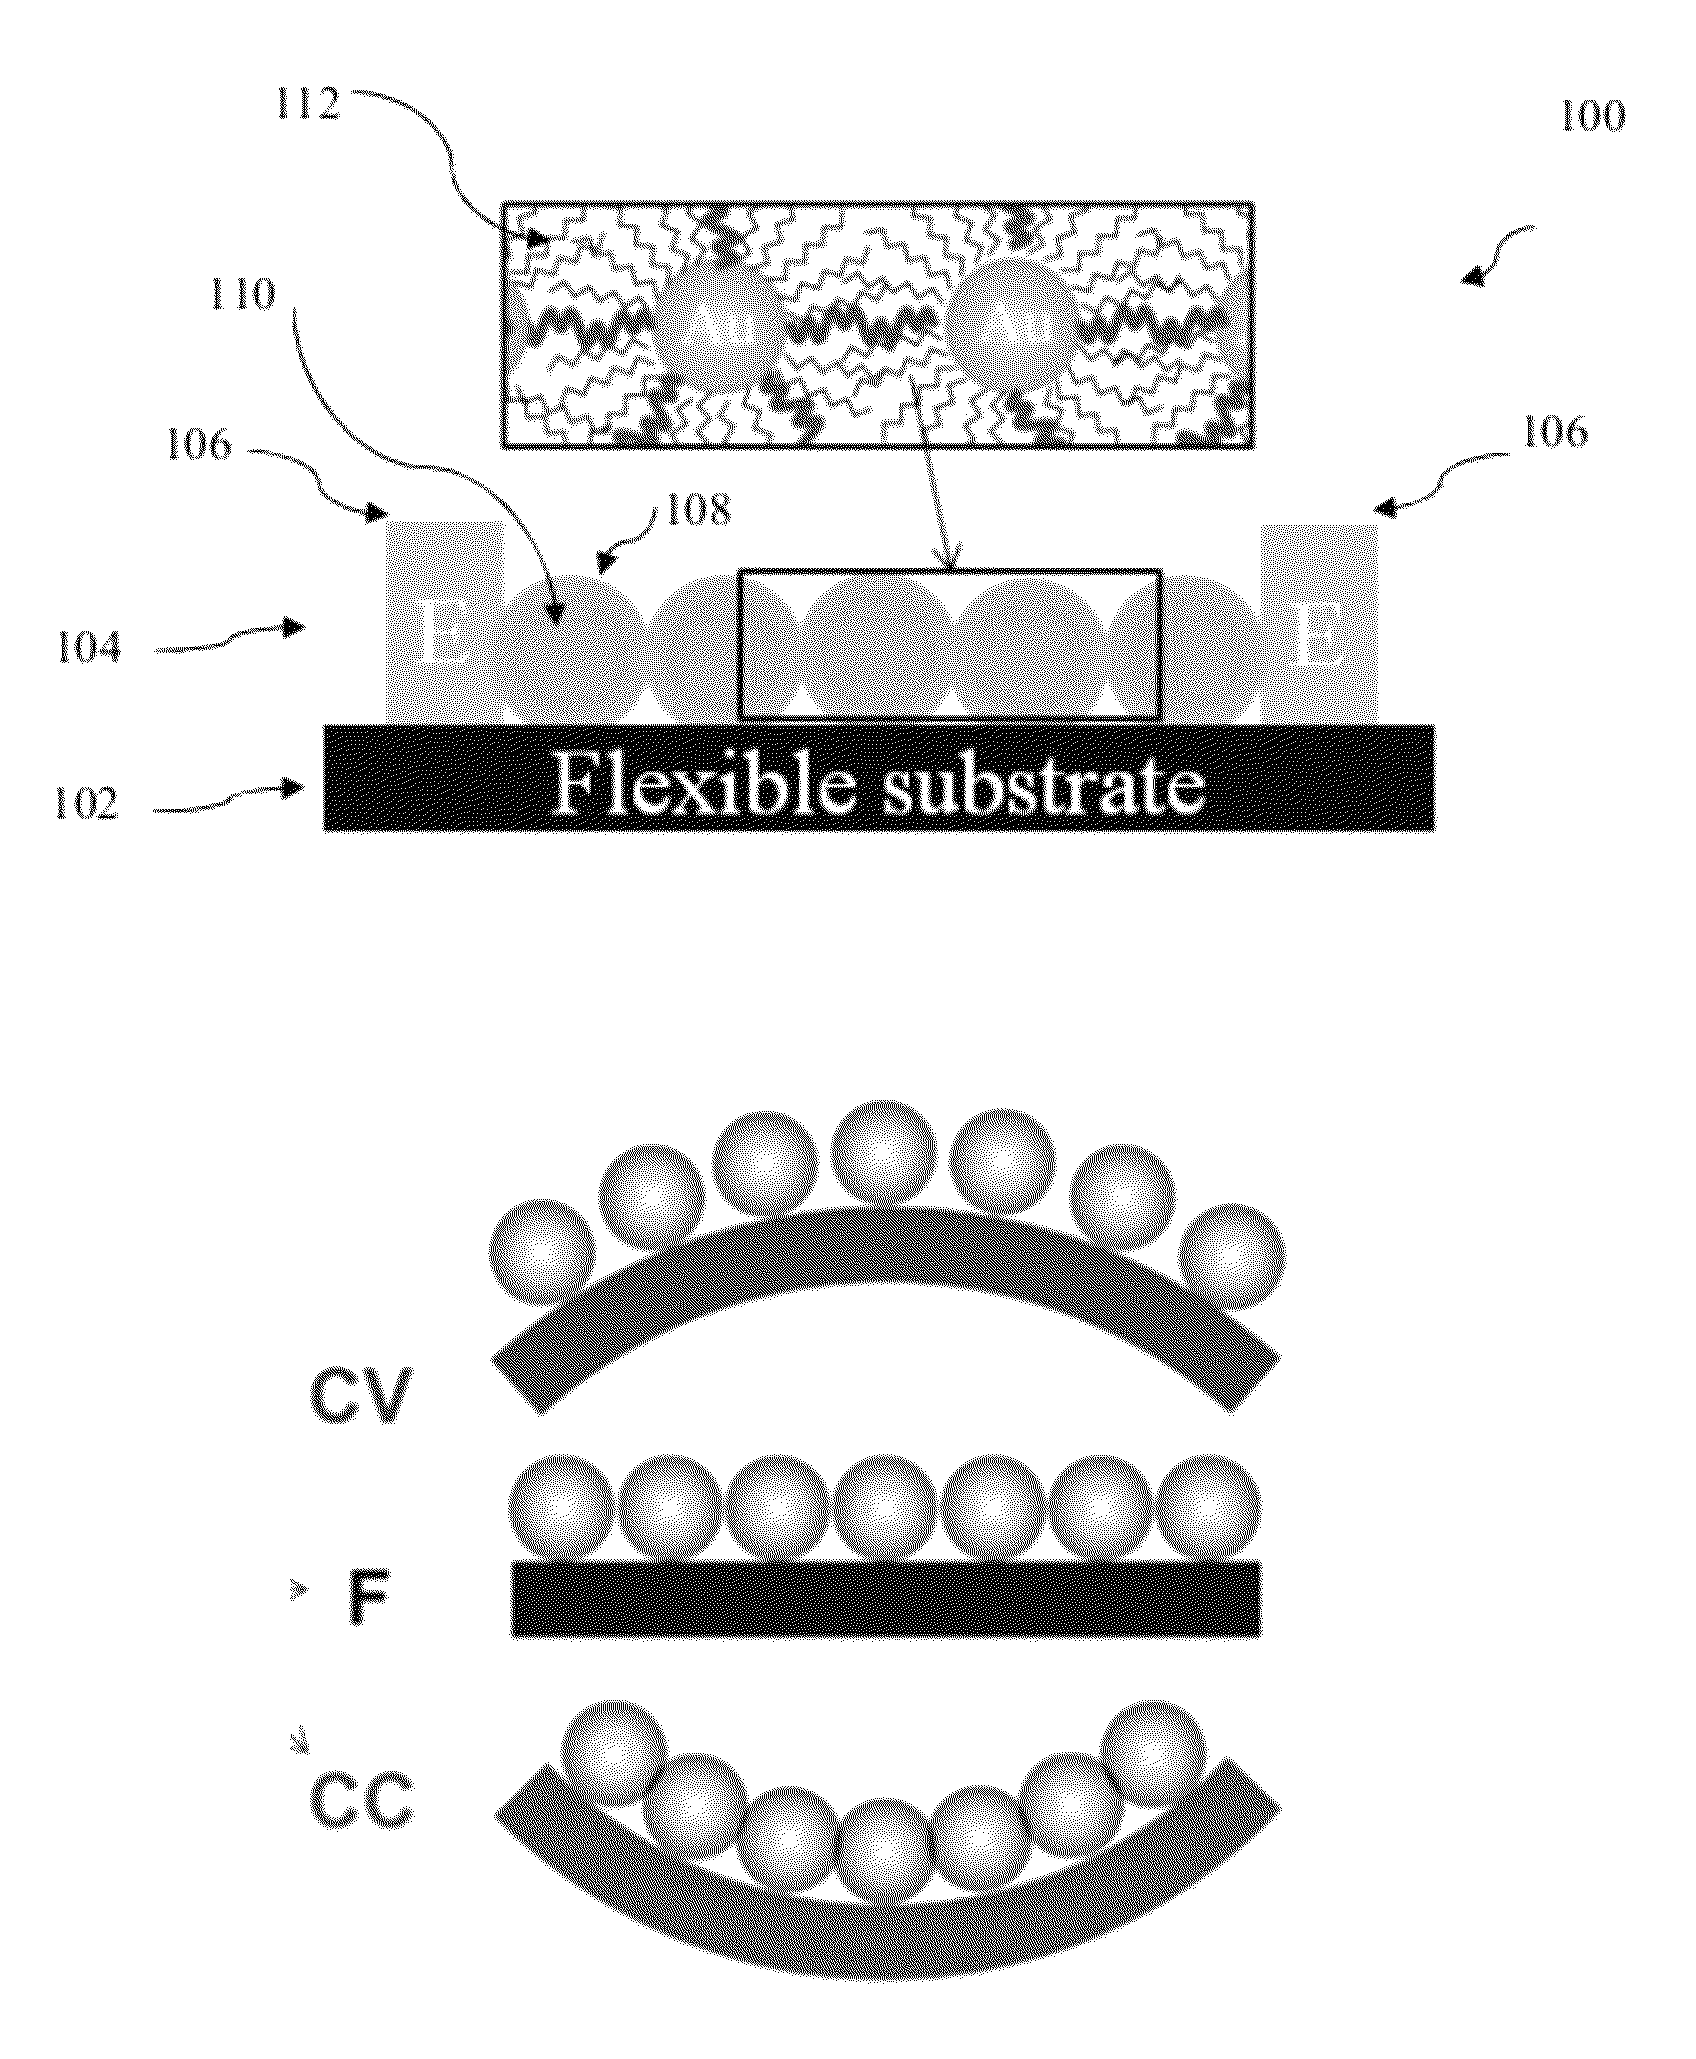 Flexible multi-moduled nanoparticle-structured sensor array on polymer substrate and methods for manufacture